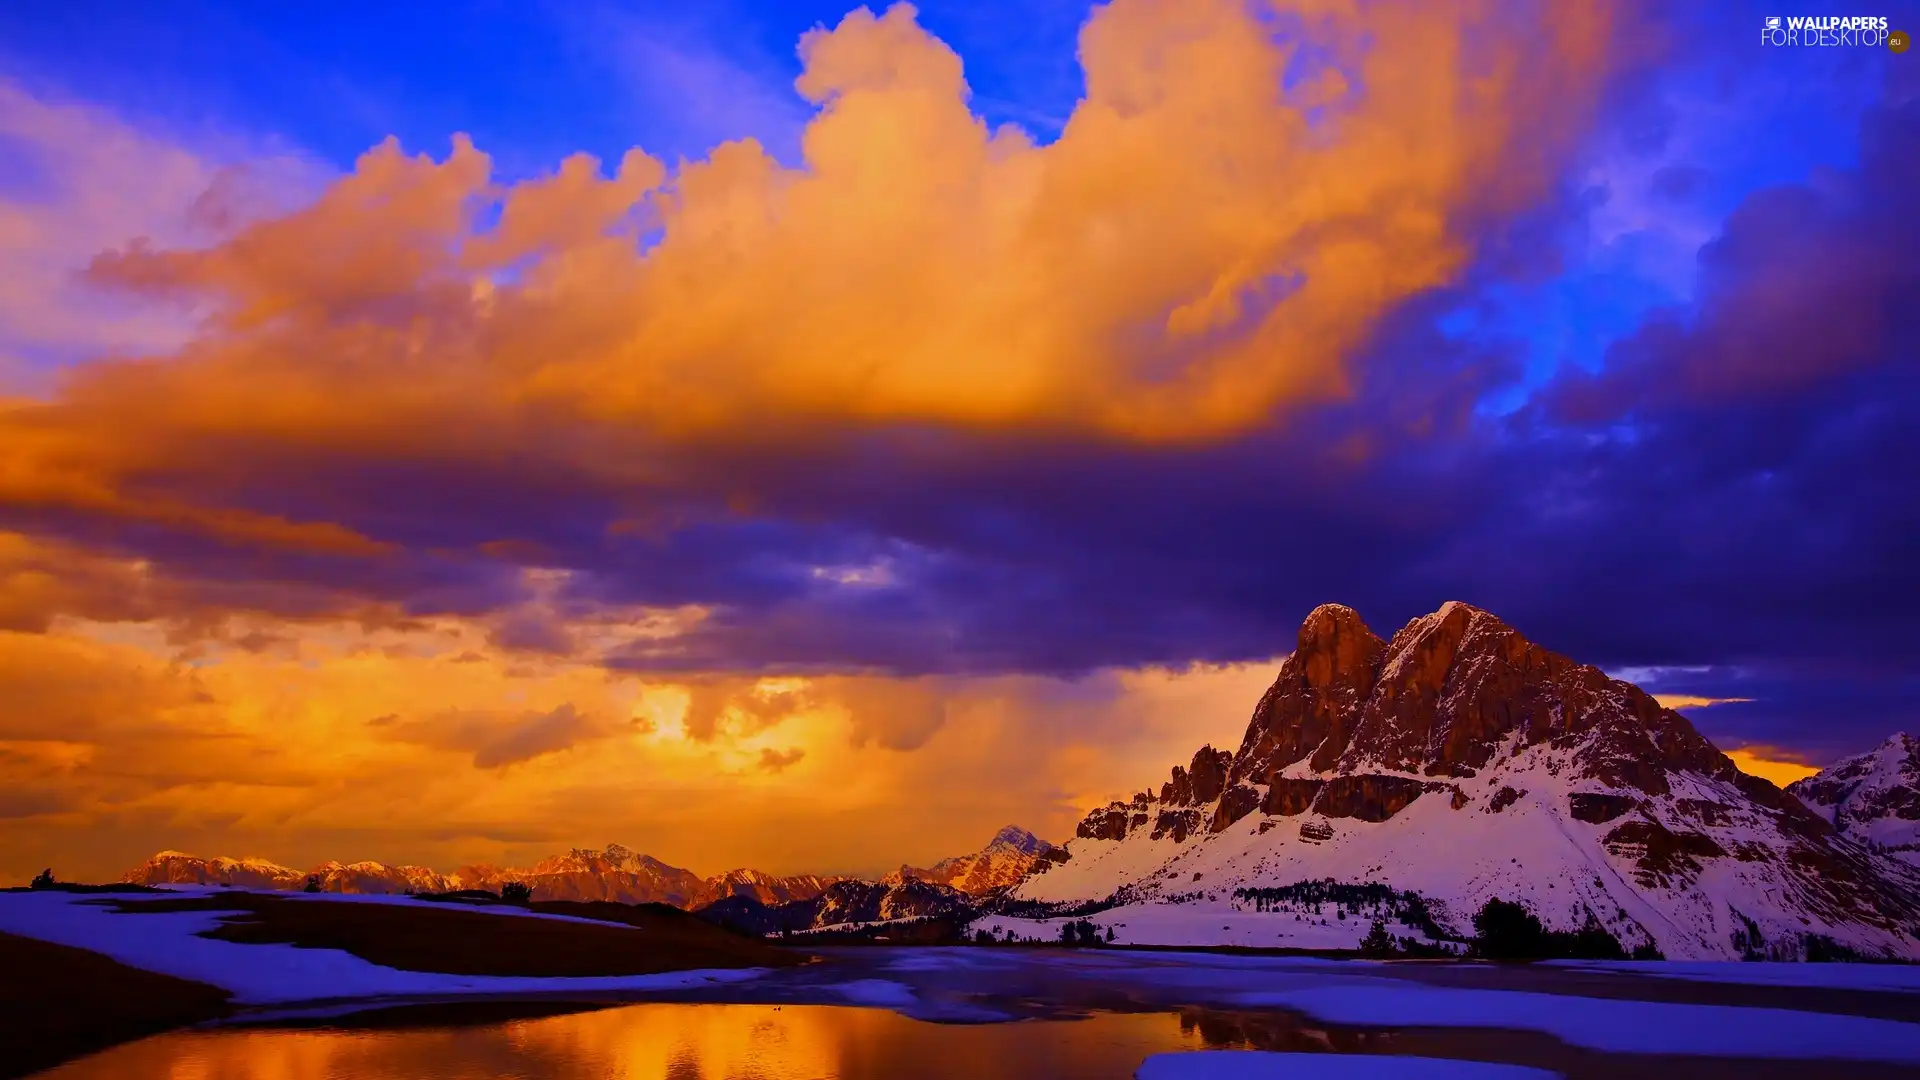 Mountains, clouds, winter, lake - For desktop wallpapers: 1920x1080